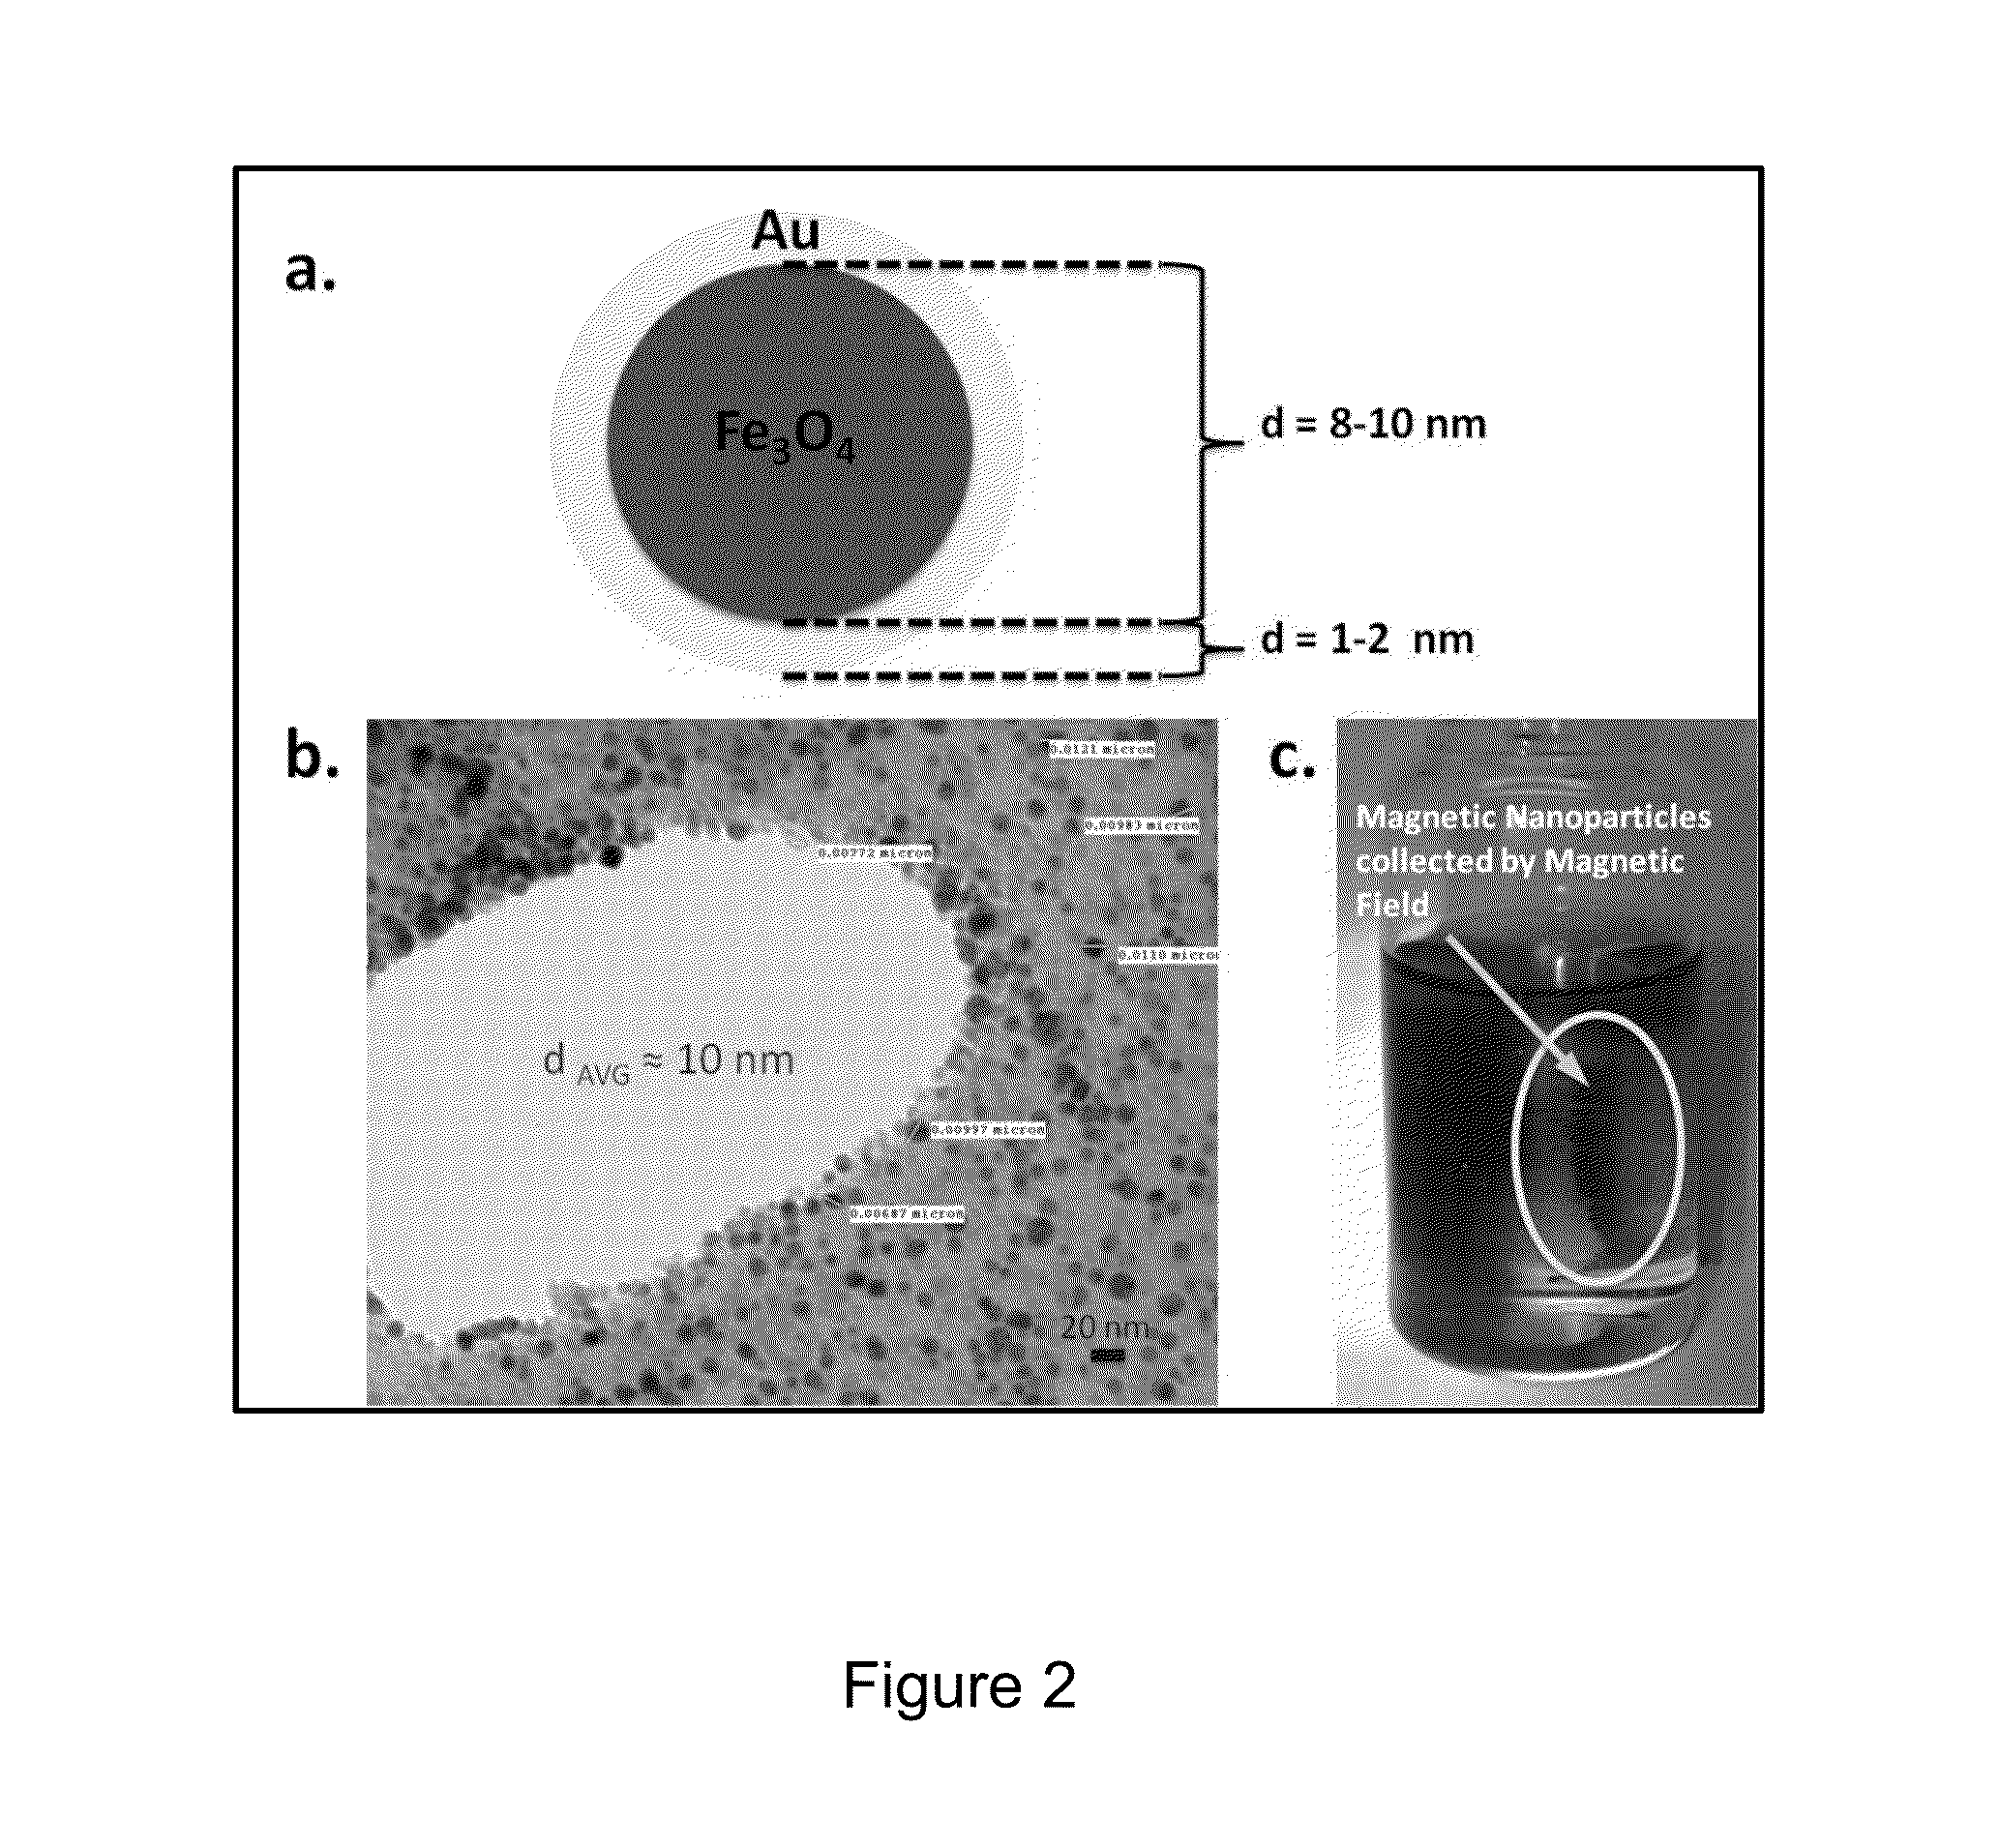 Compositions, methods, and systems for separating carbon-based nanostructures